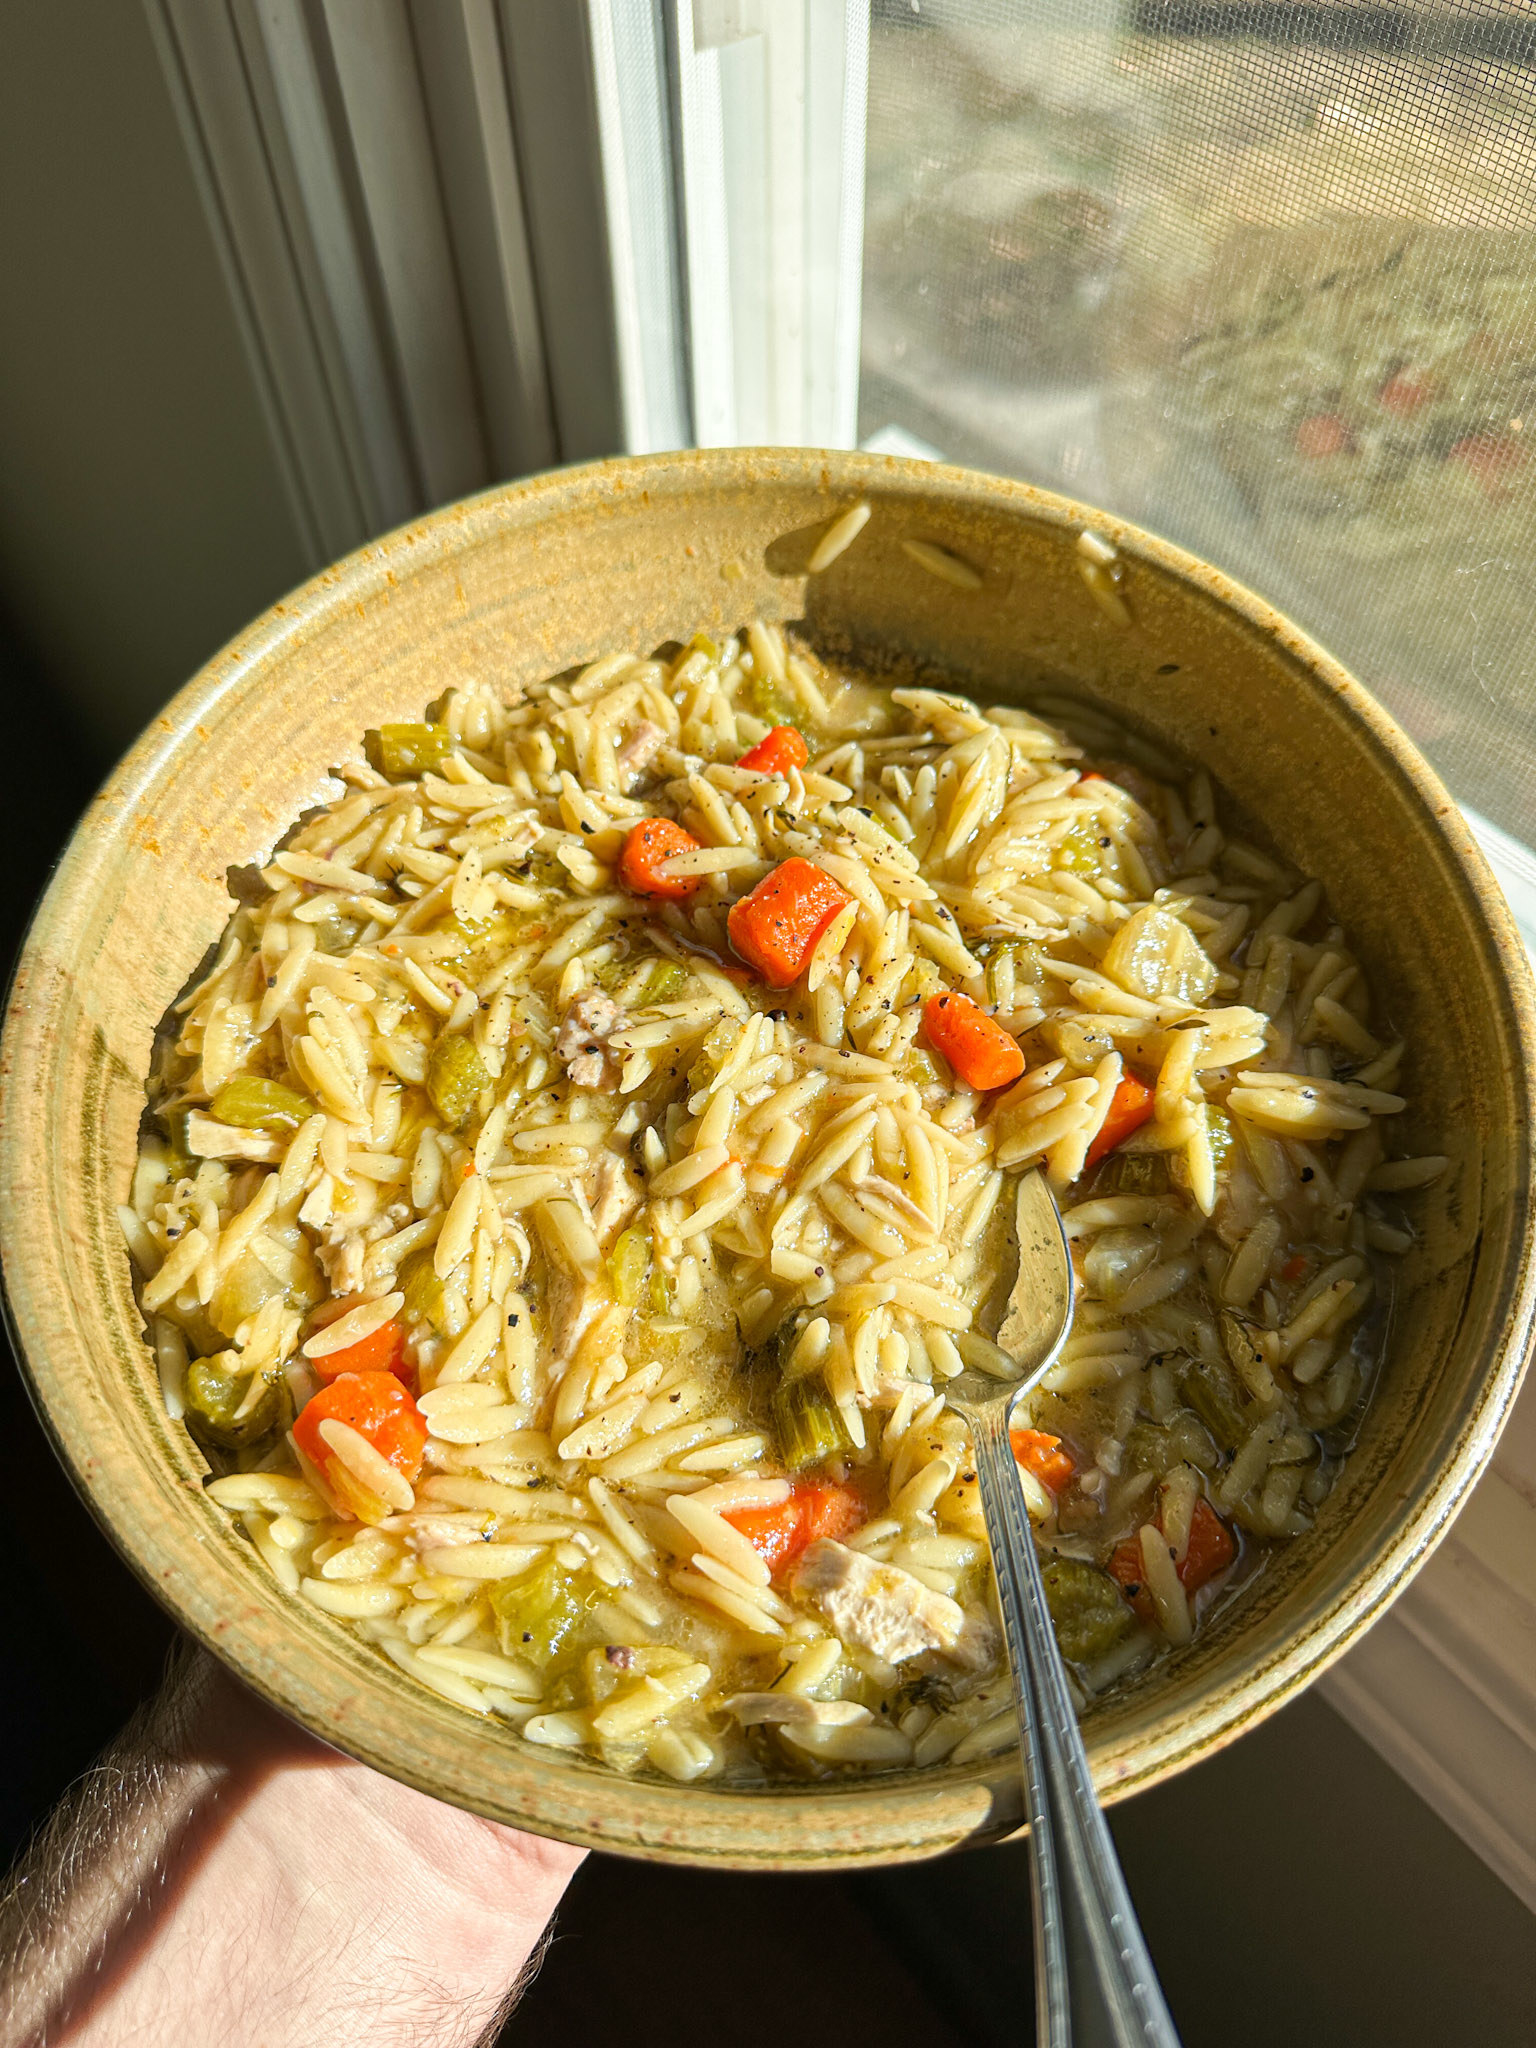 Bowl of chicken, veggies, and orzo in broth